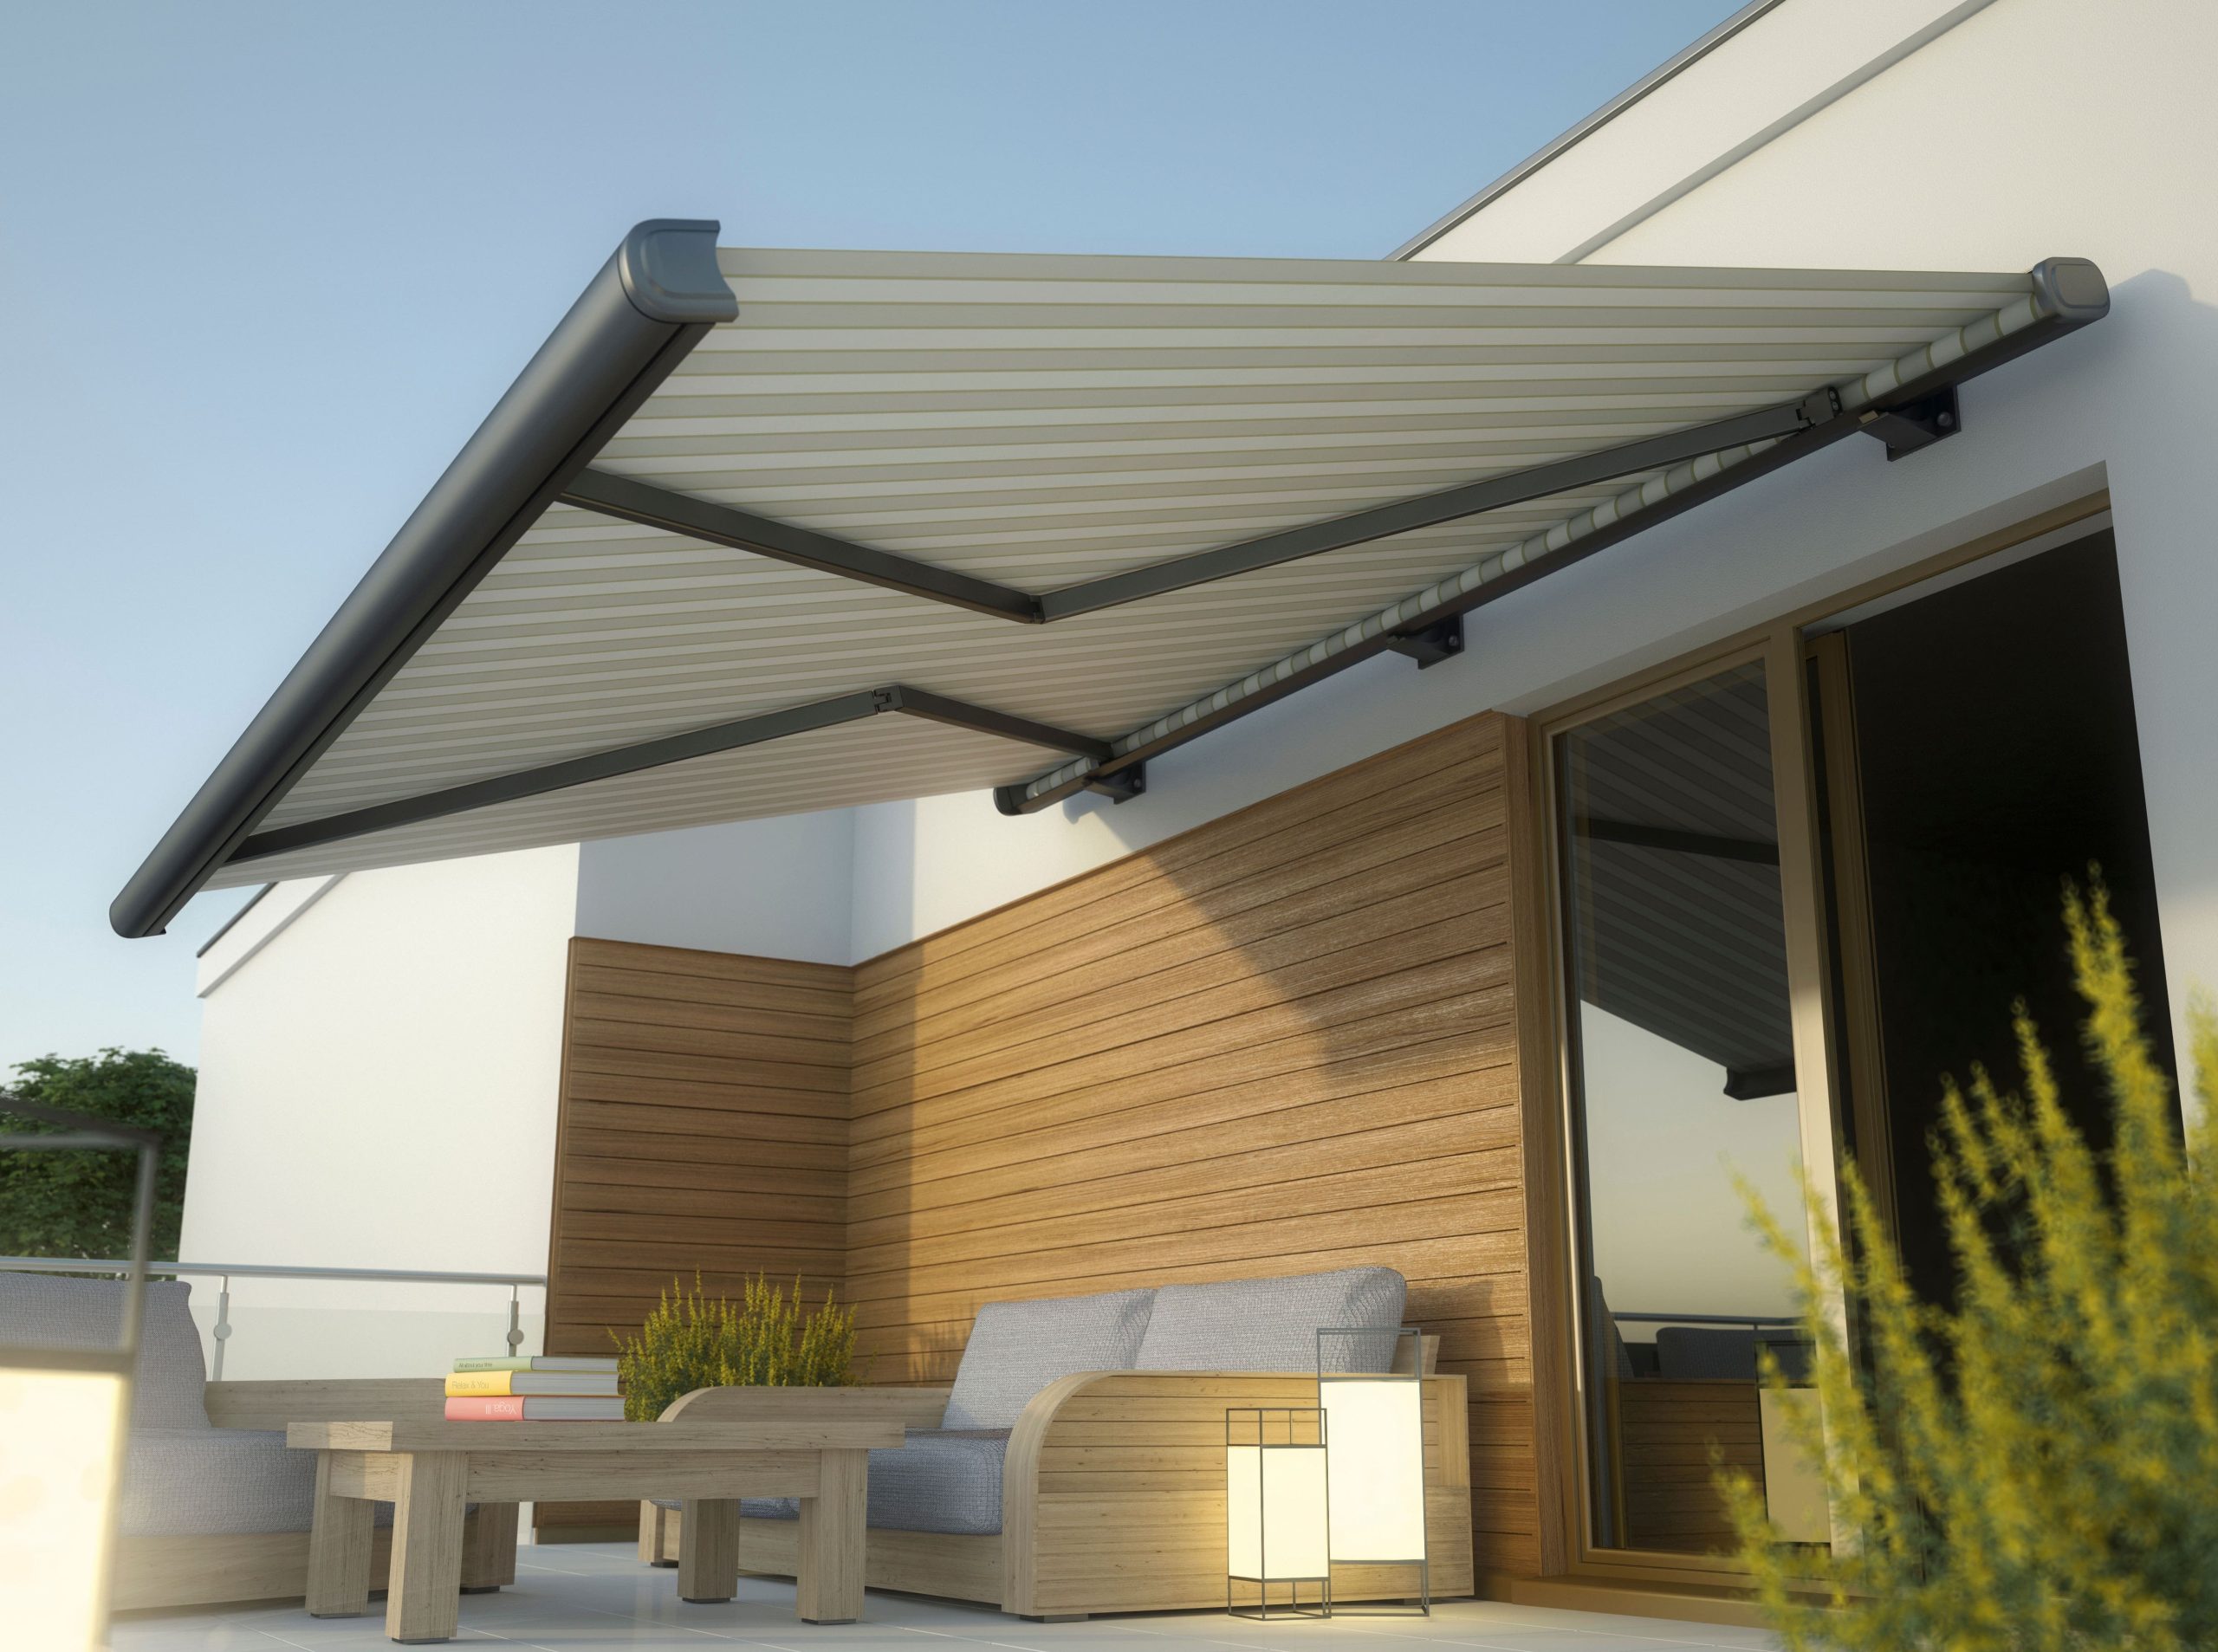 Convenient retracable awning for outdoor space in The Villages, FL.